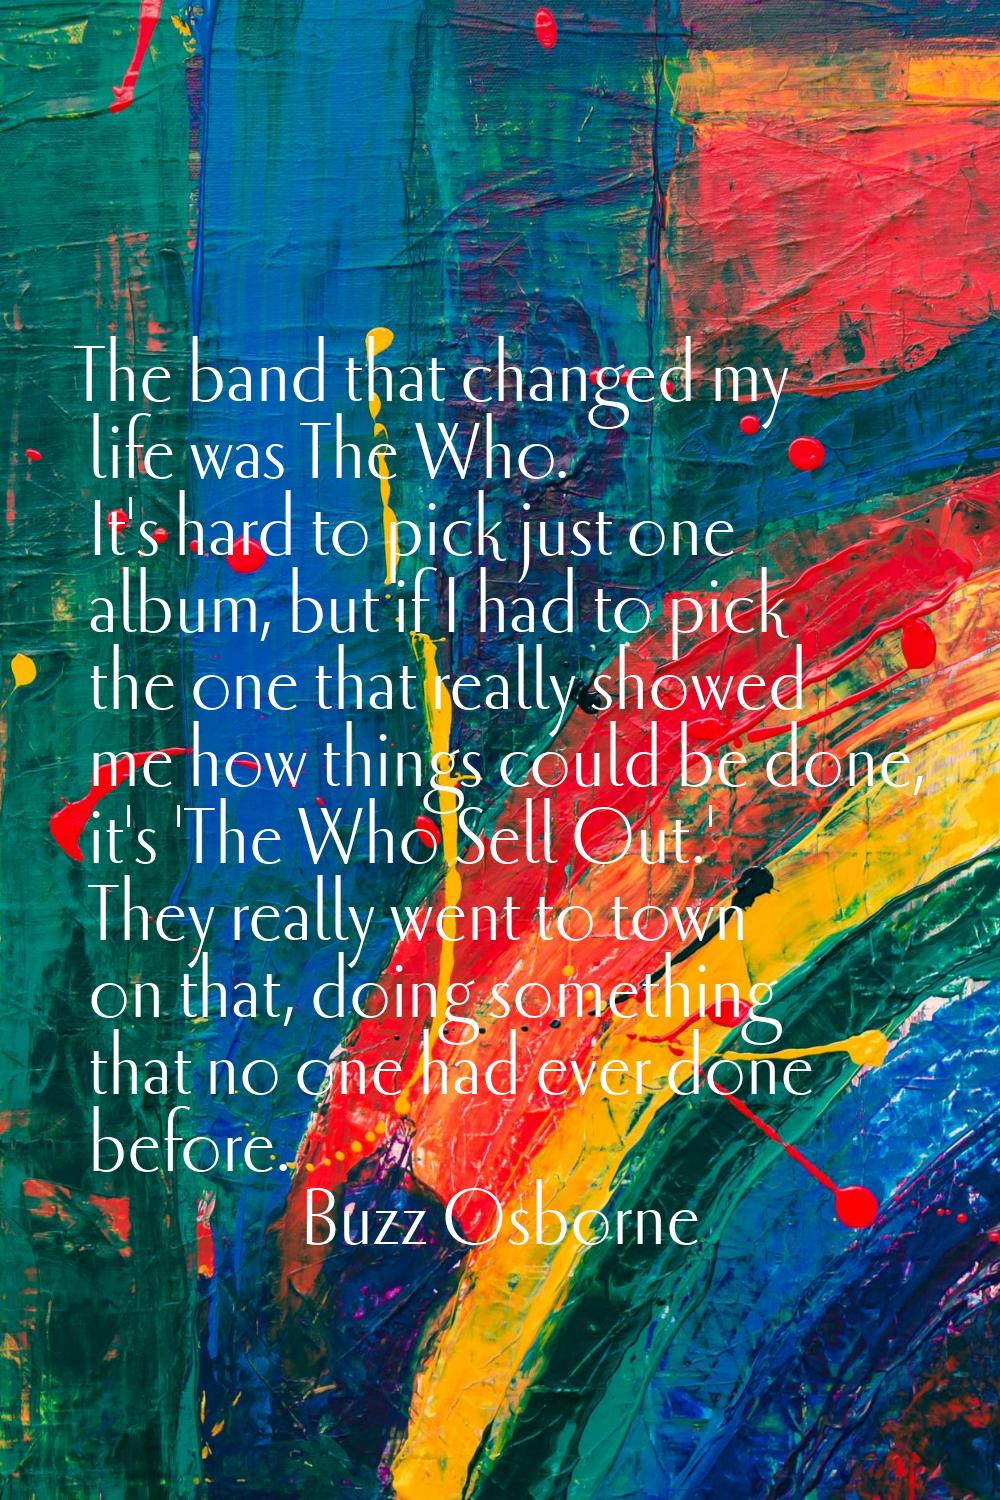 The band that changed my life was The Who. It's hard to pick just one album, but if I had to pick t